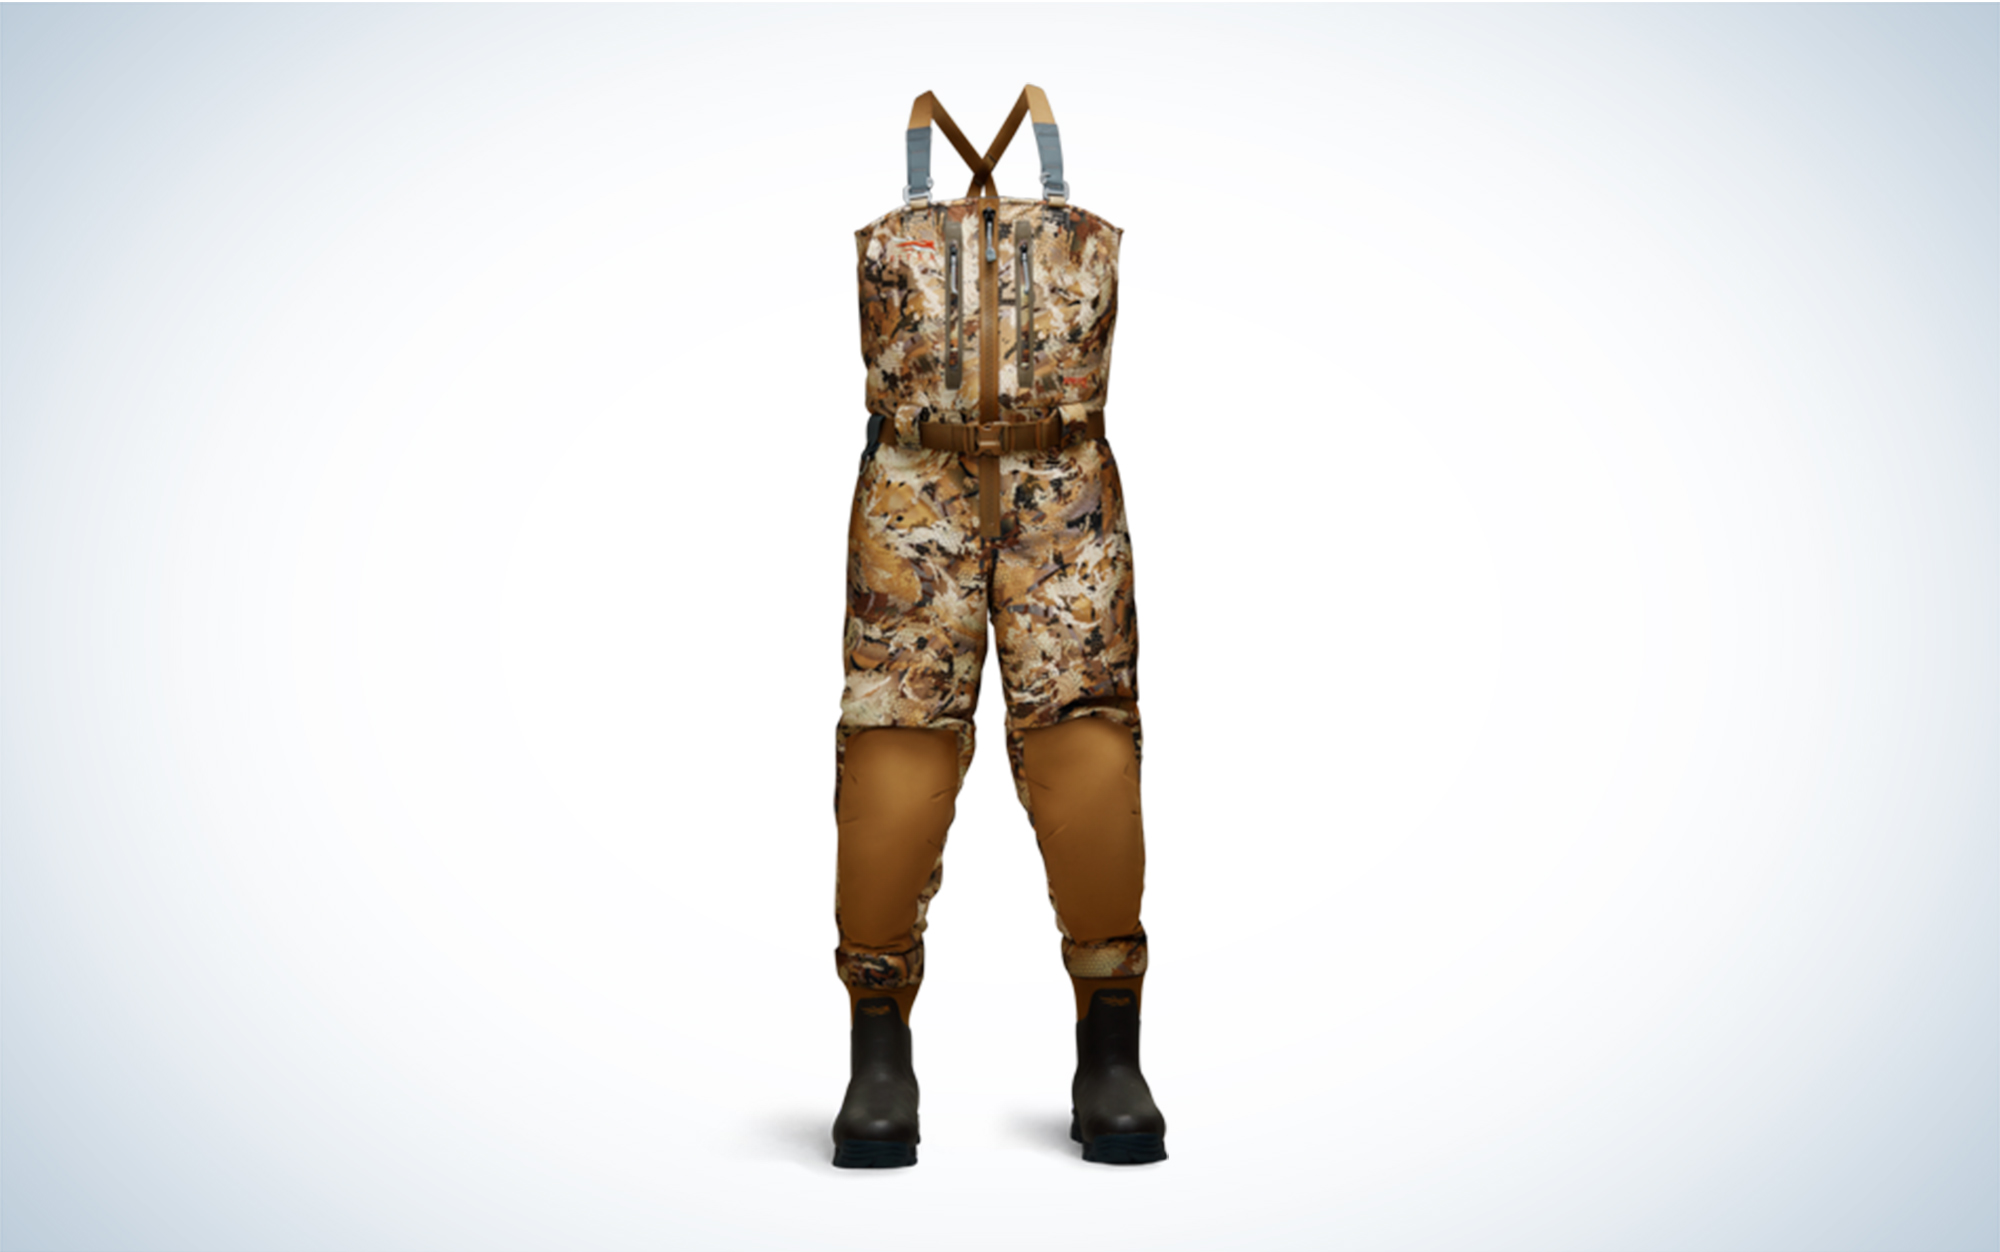 These SITKA Delta Zip Waders are the waterfowl marsh camouflage pattern.